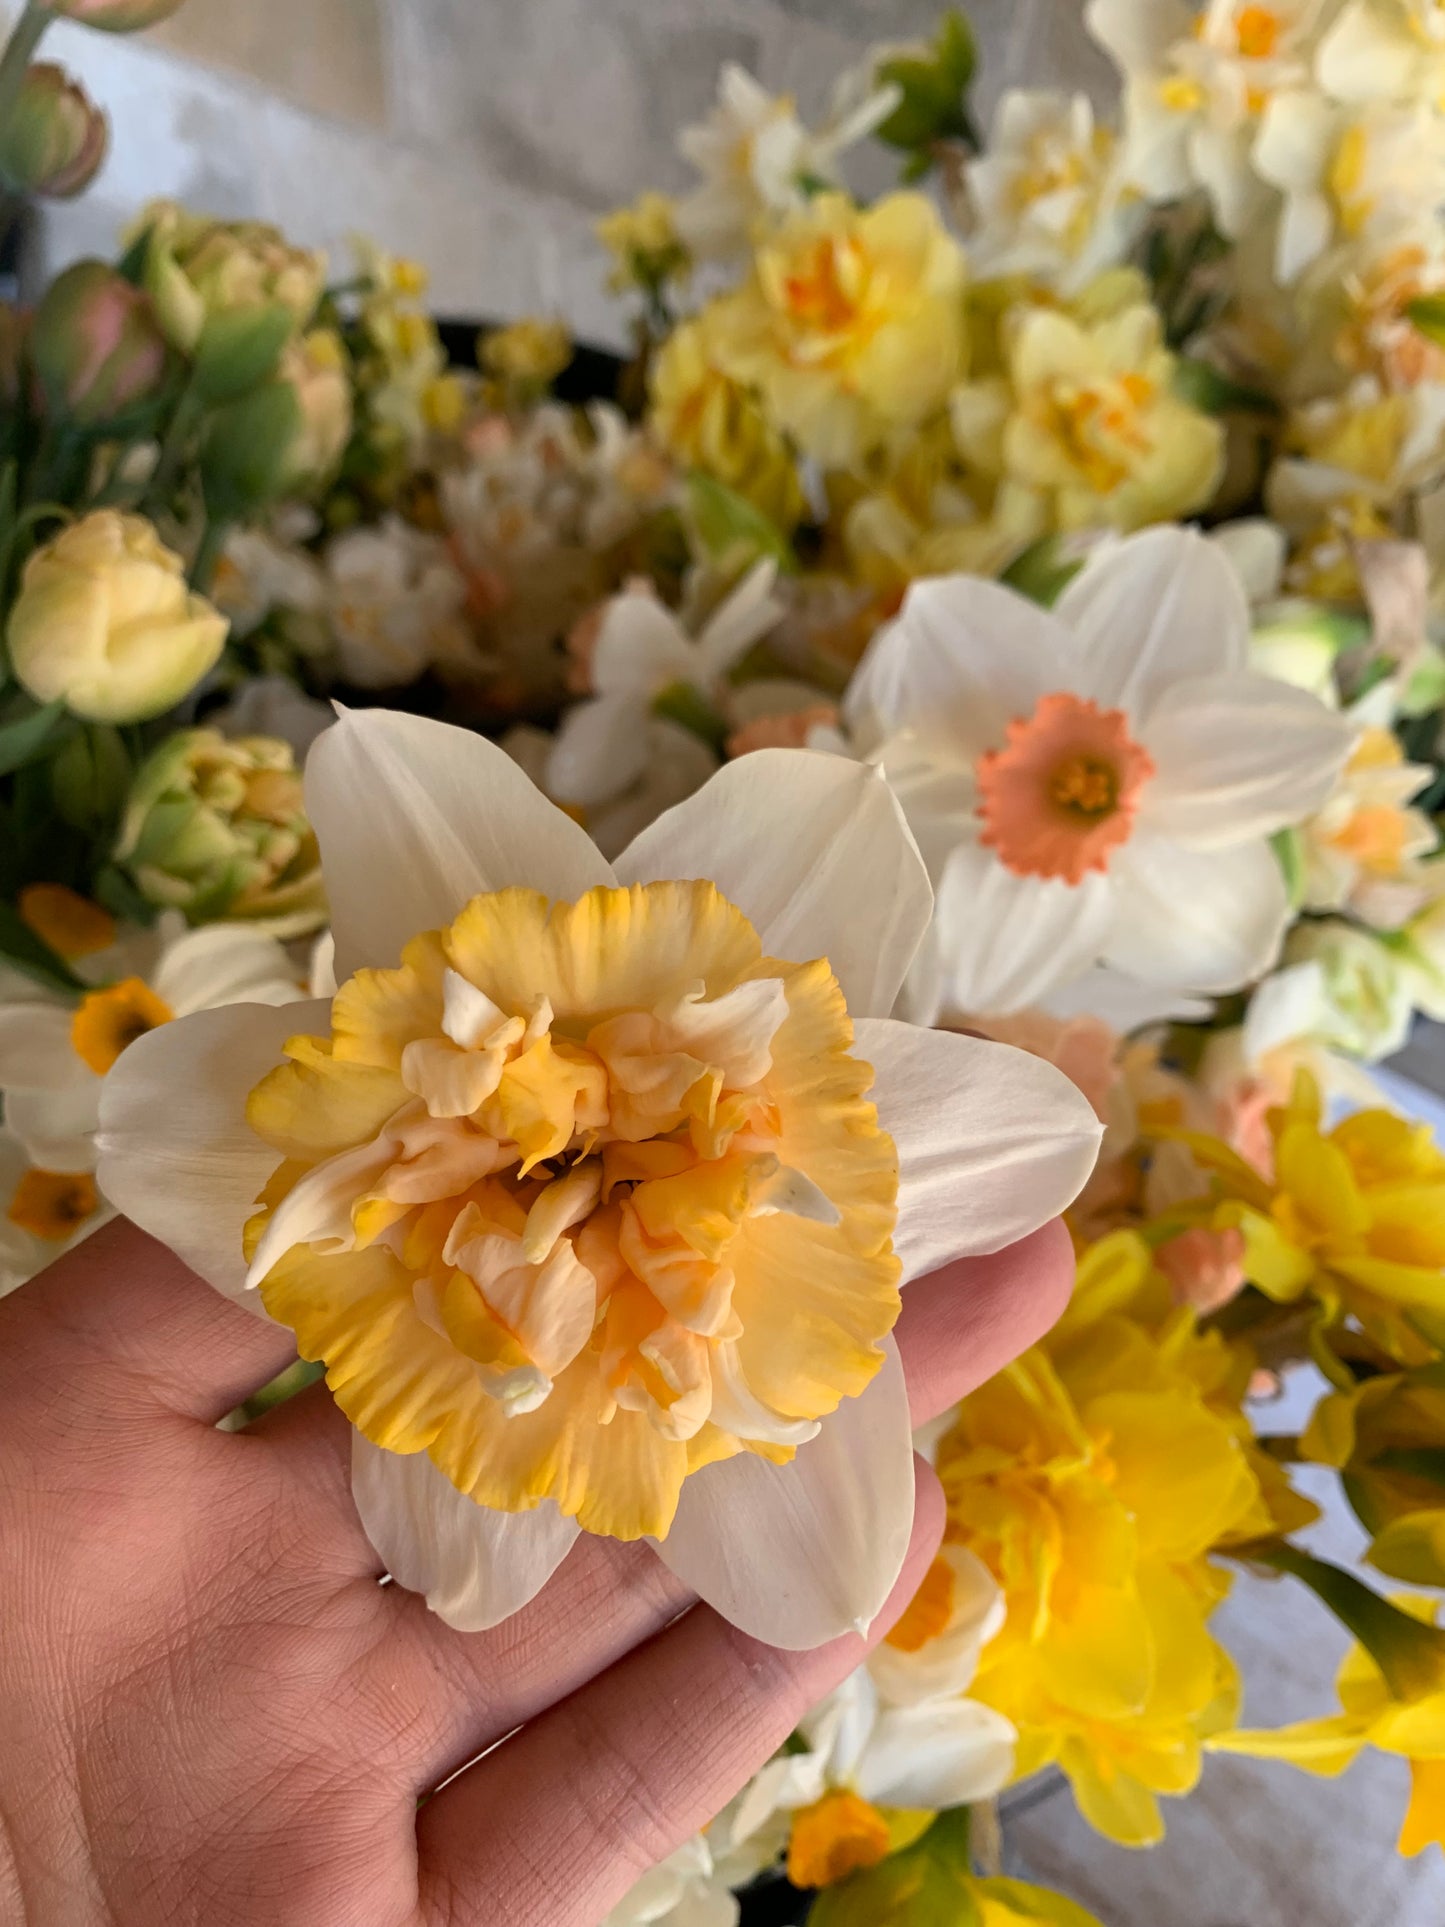 Four Weeks of Fragrant Narcissus (April-May)